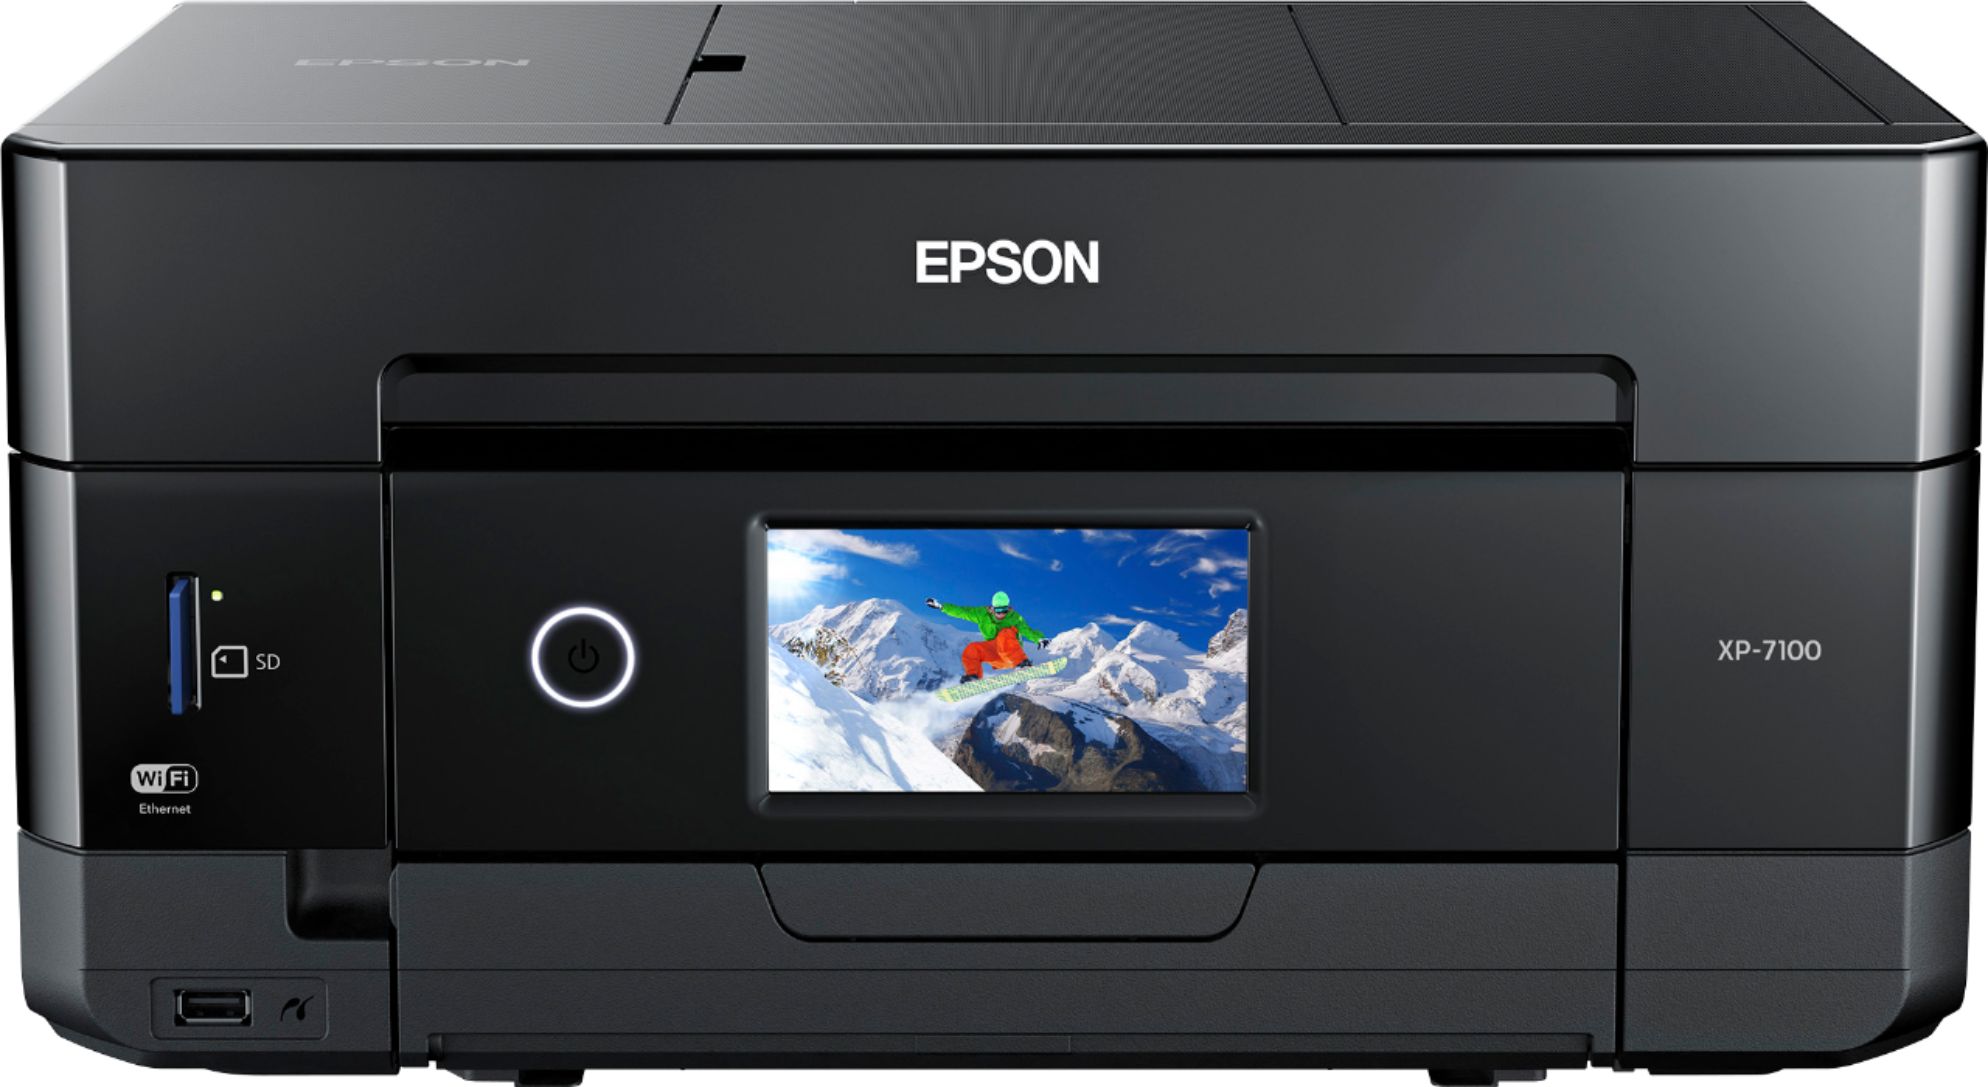 Expression XP-2150, Consumer, Inkjet Printers, Printers, Products